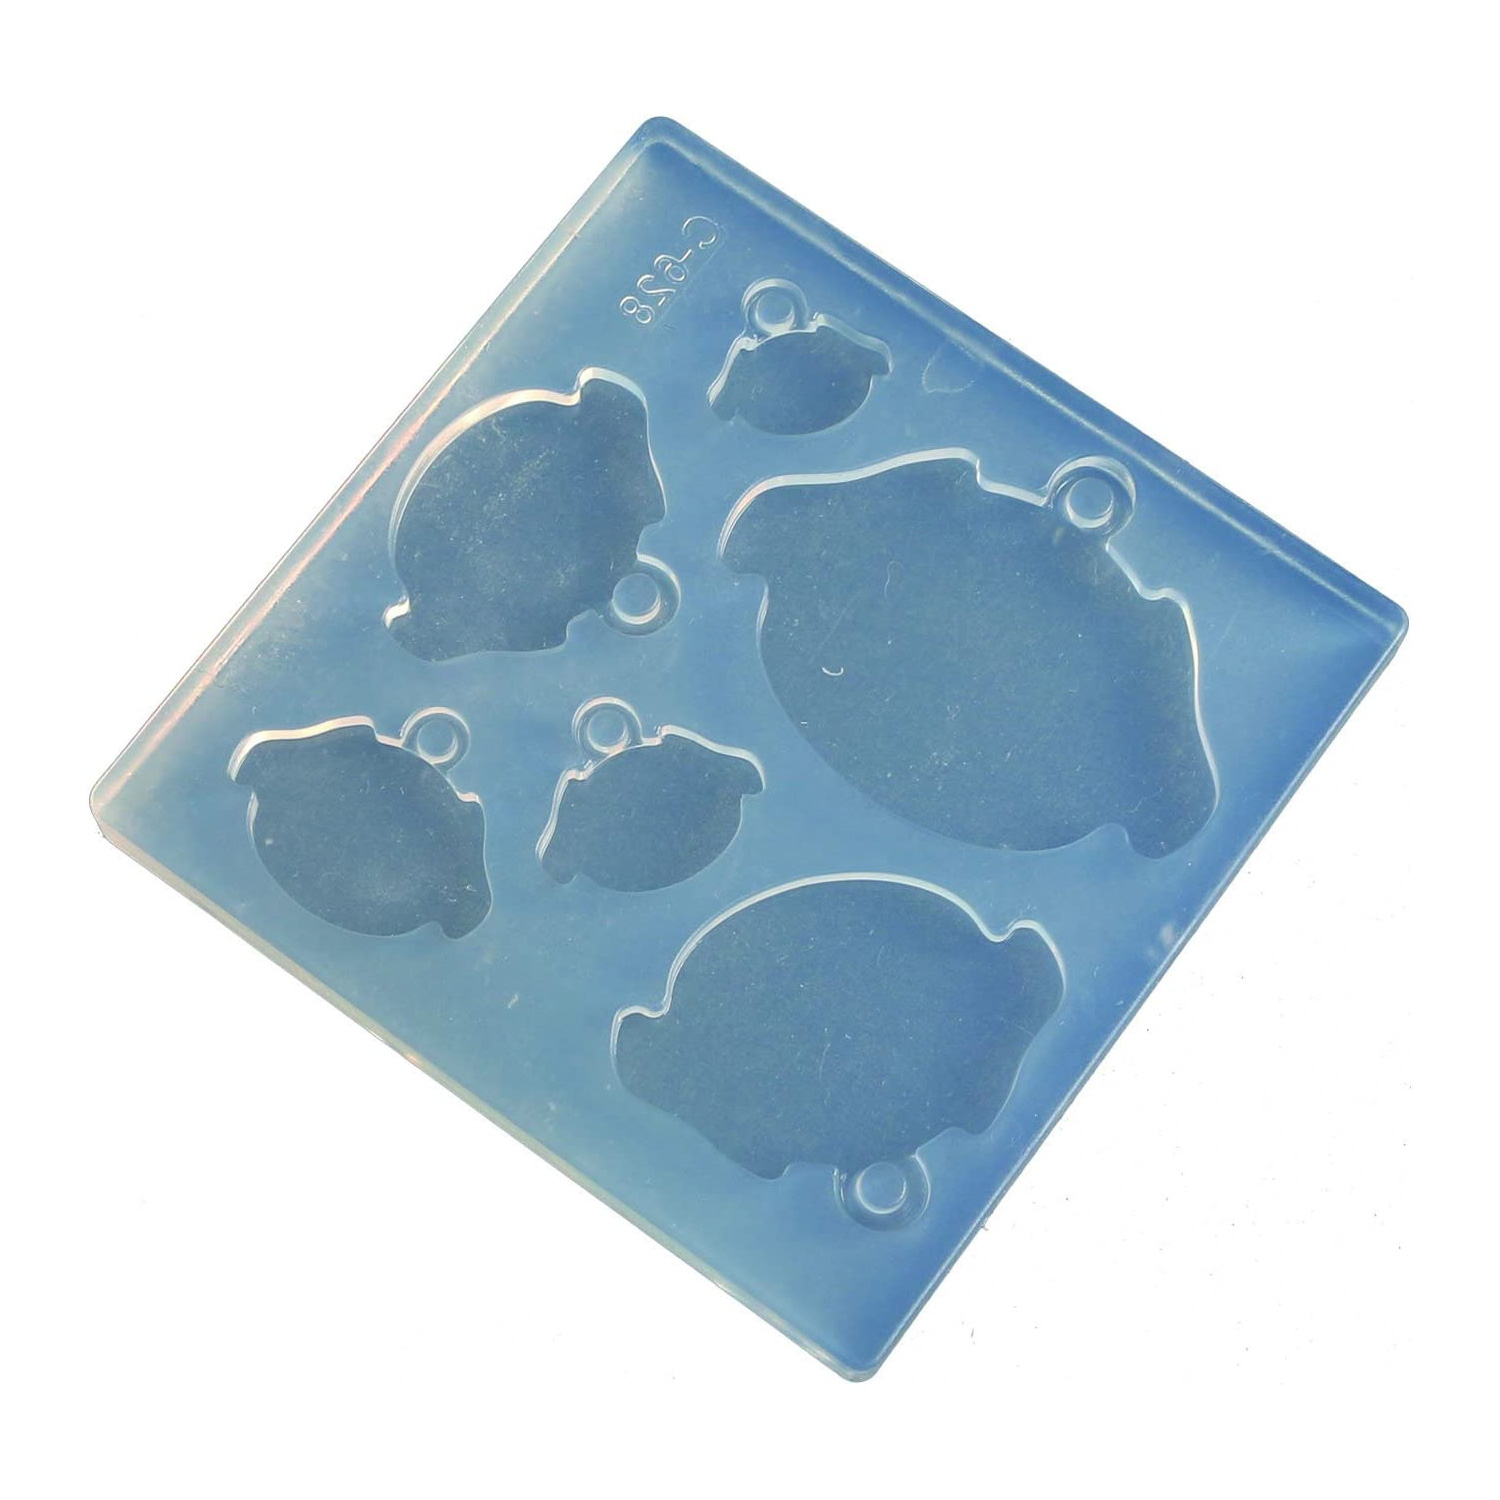 KAM-REJ-628  Resin Crafting Silicone Mold  (pcs)